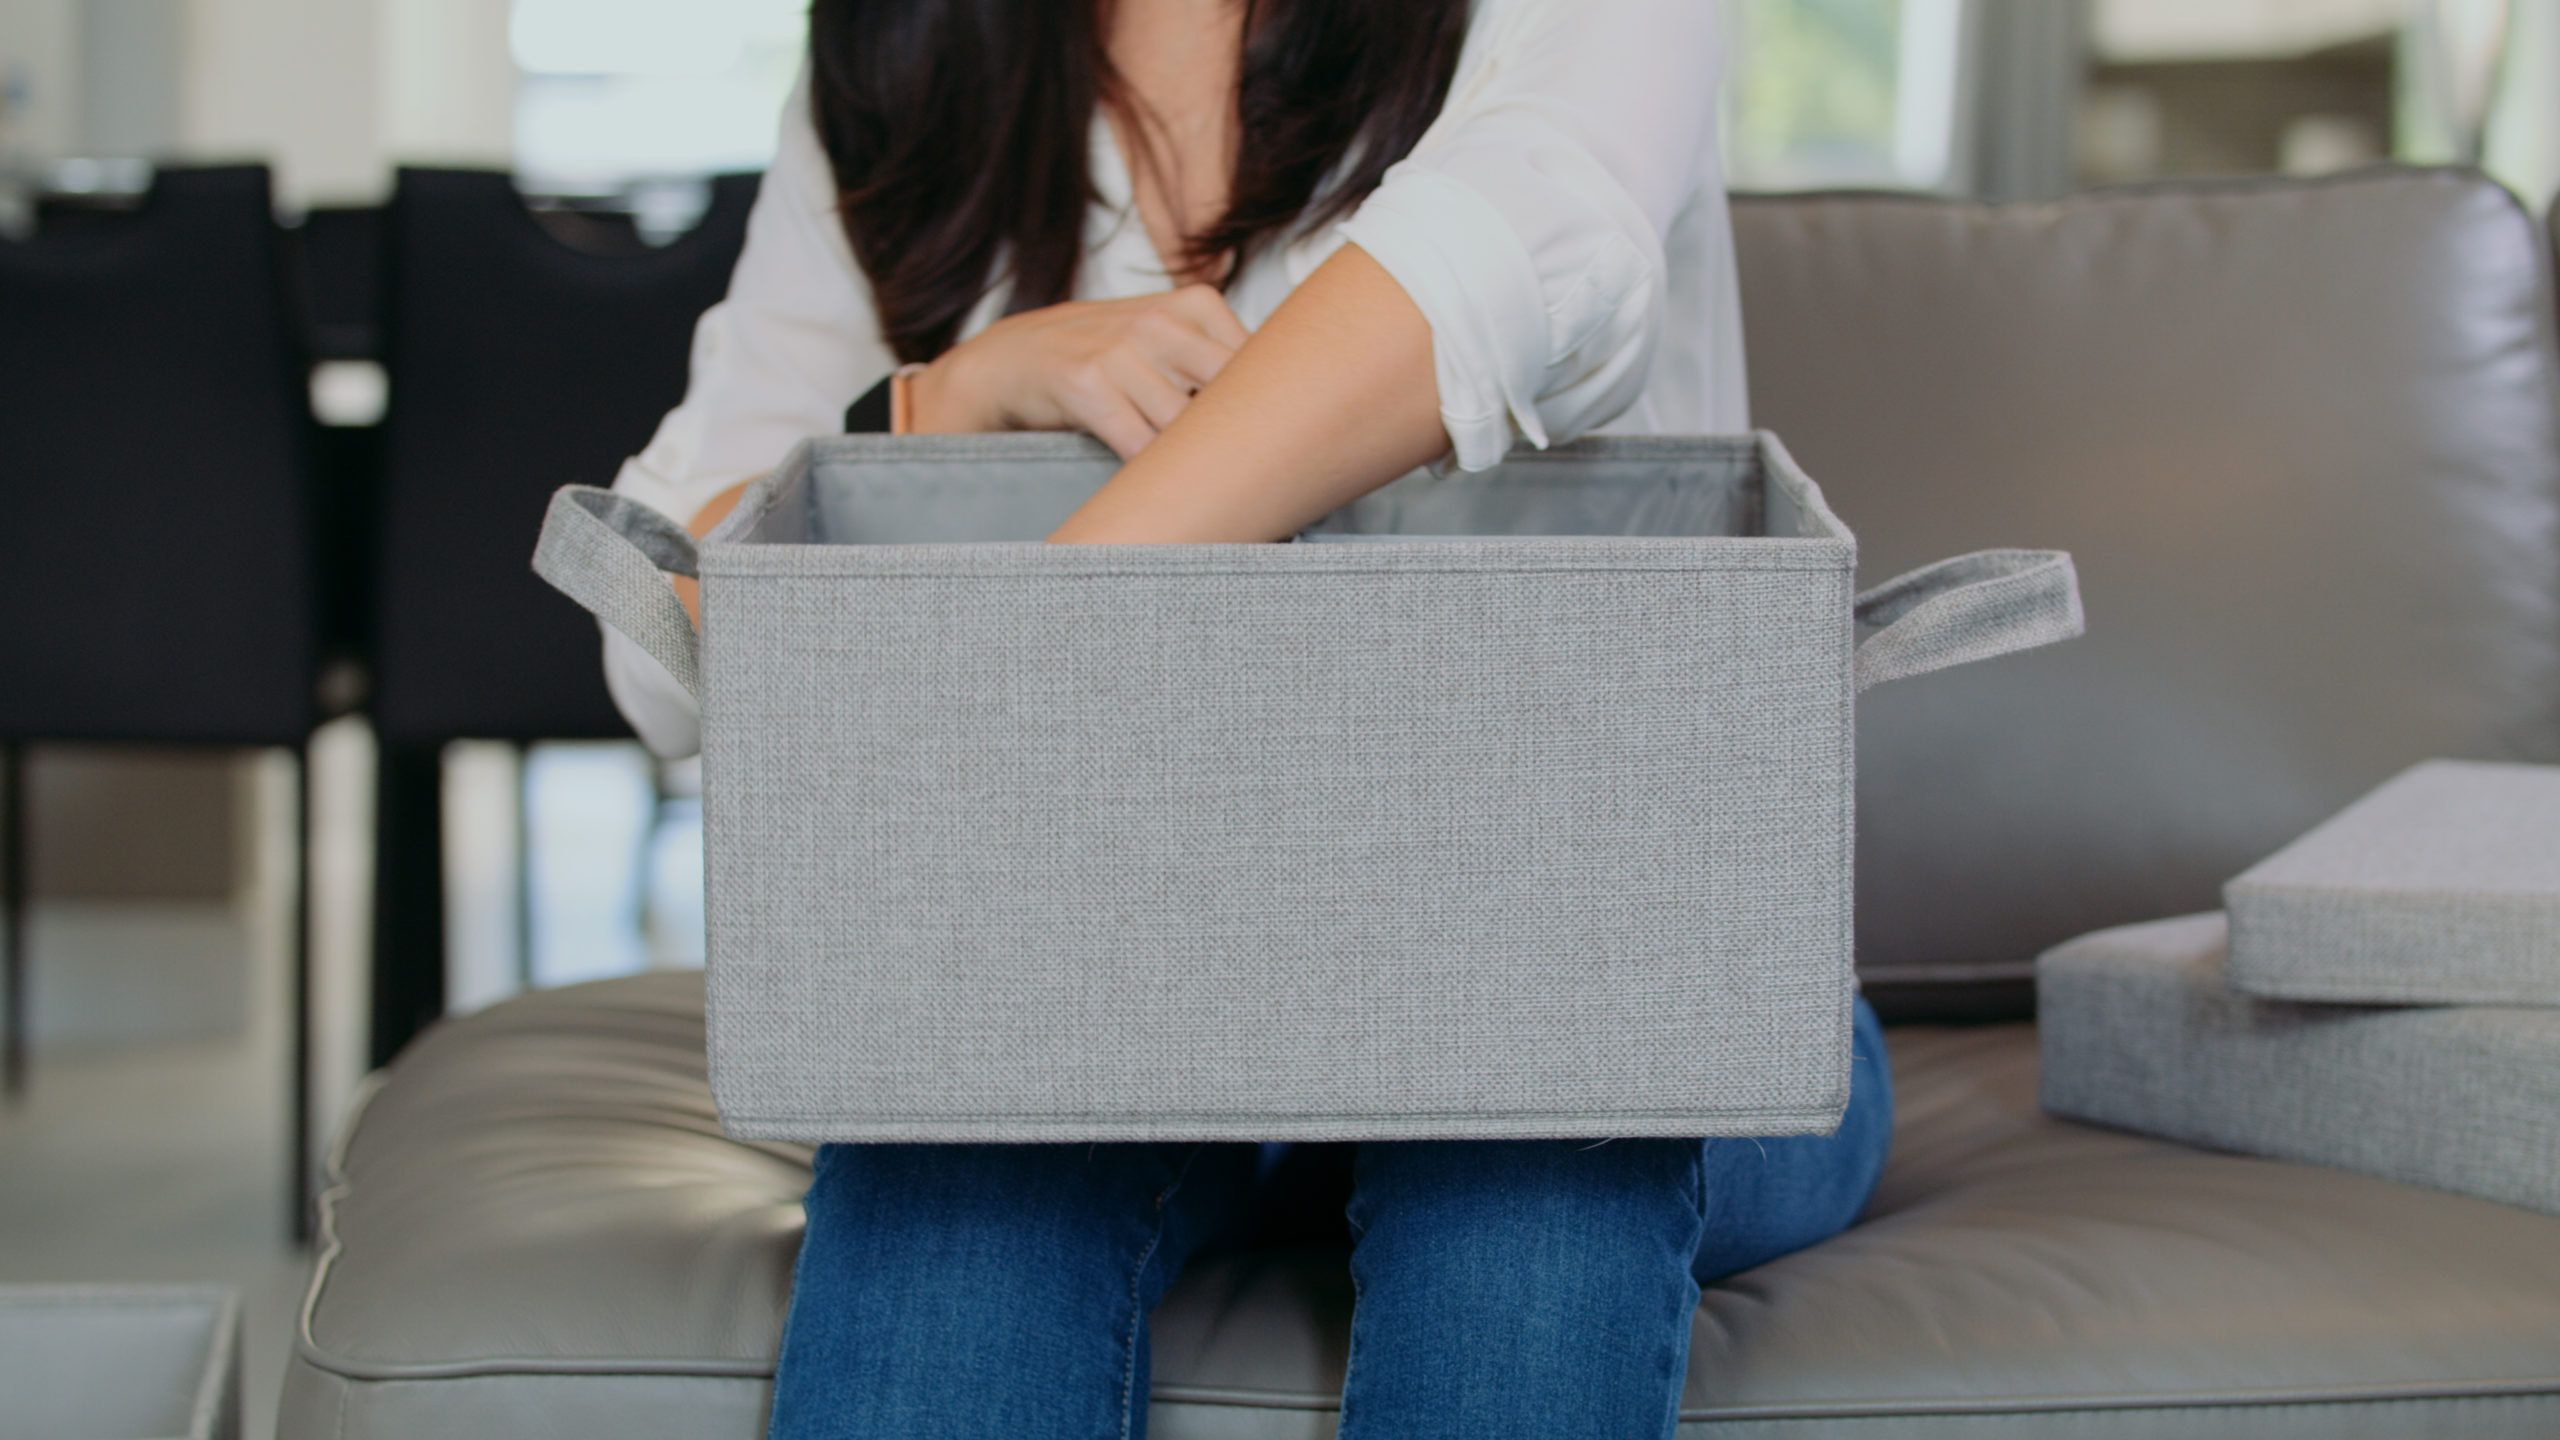 Audy Global Enterprise Ottoman Woman wearing jeans reaching into a box while sitting on a couch